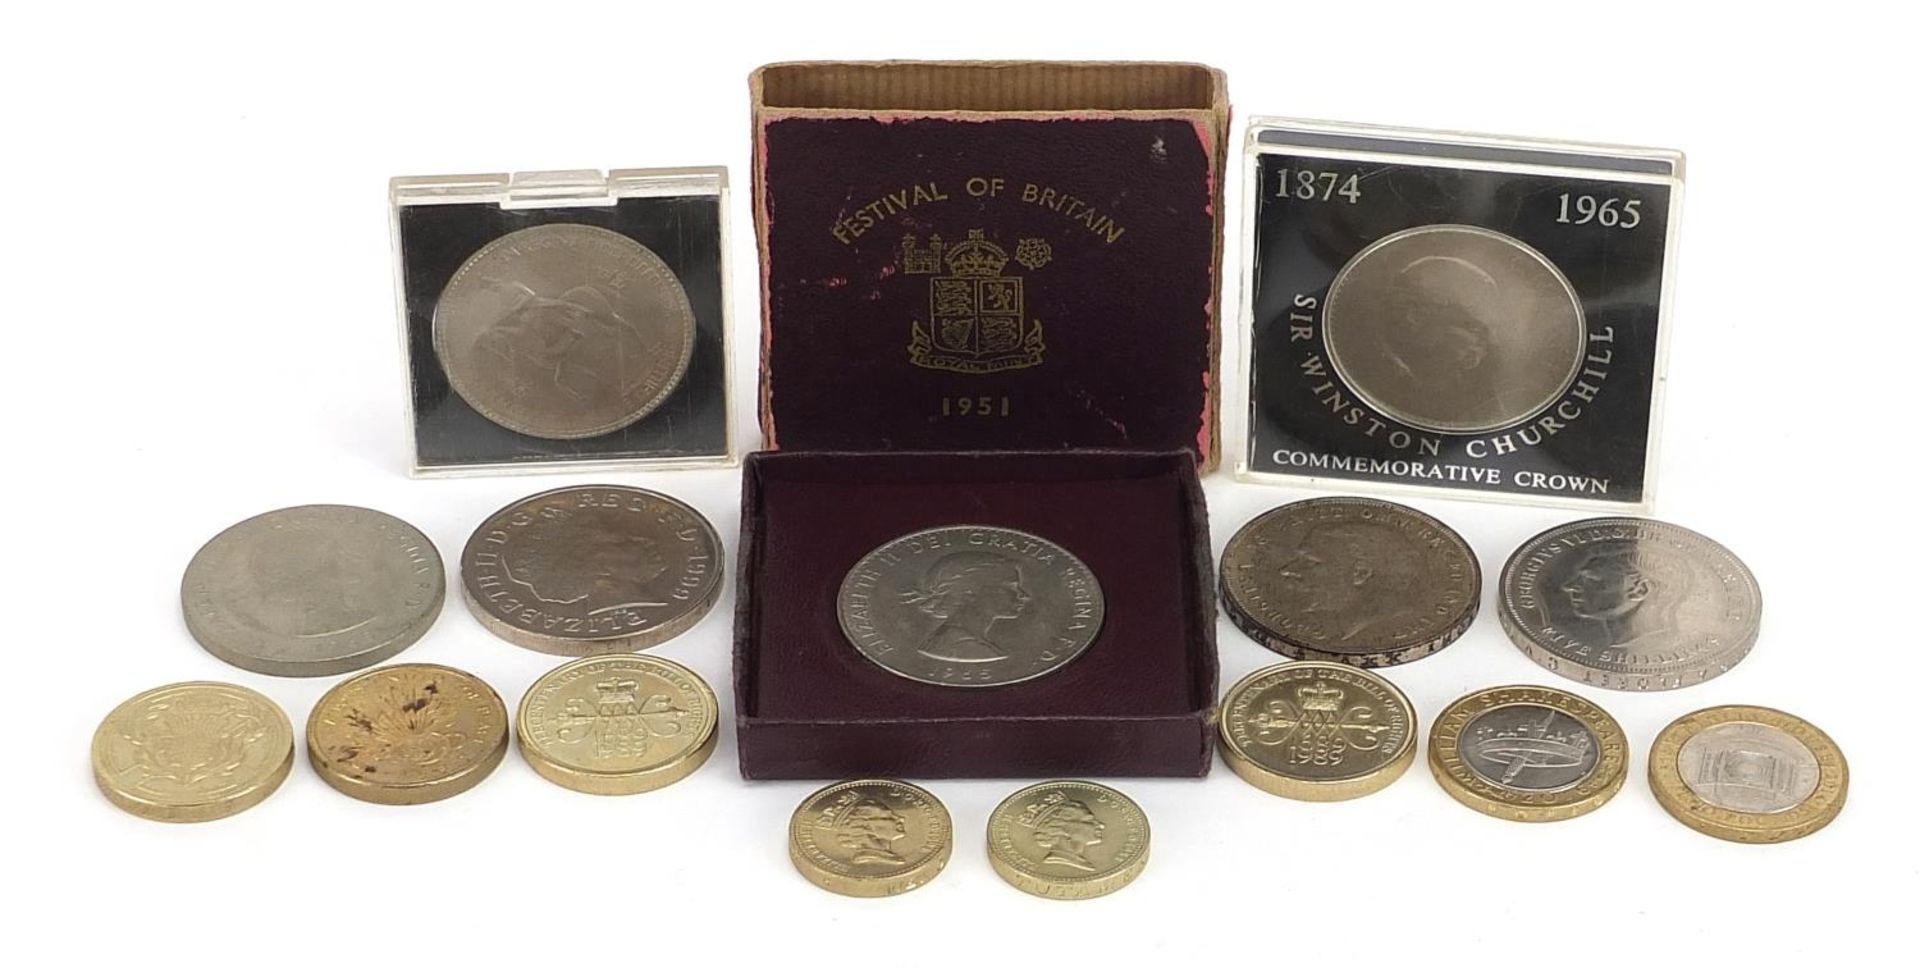 British coinage including 1935 Rocking Horse crown, five pound, two pound and one pound coins